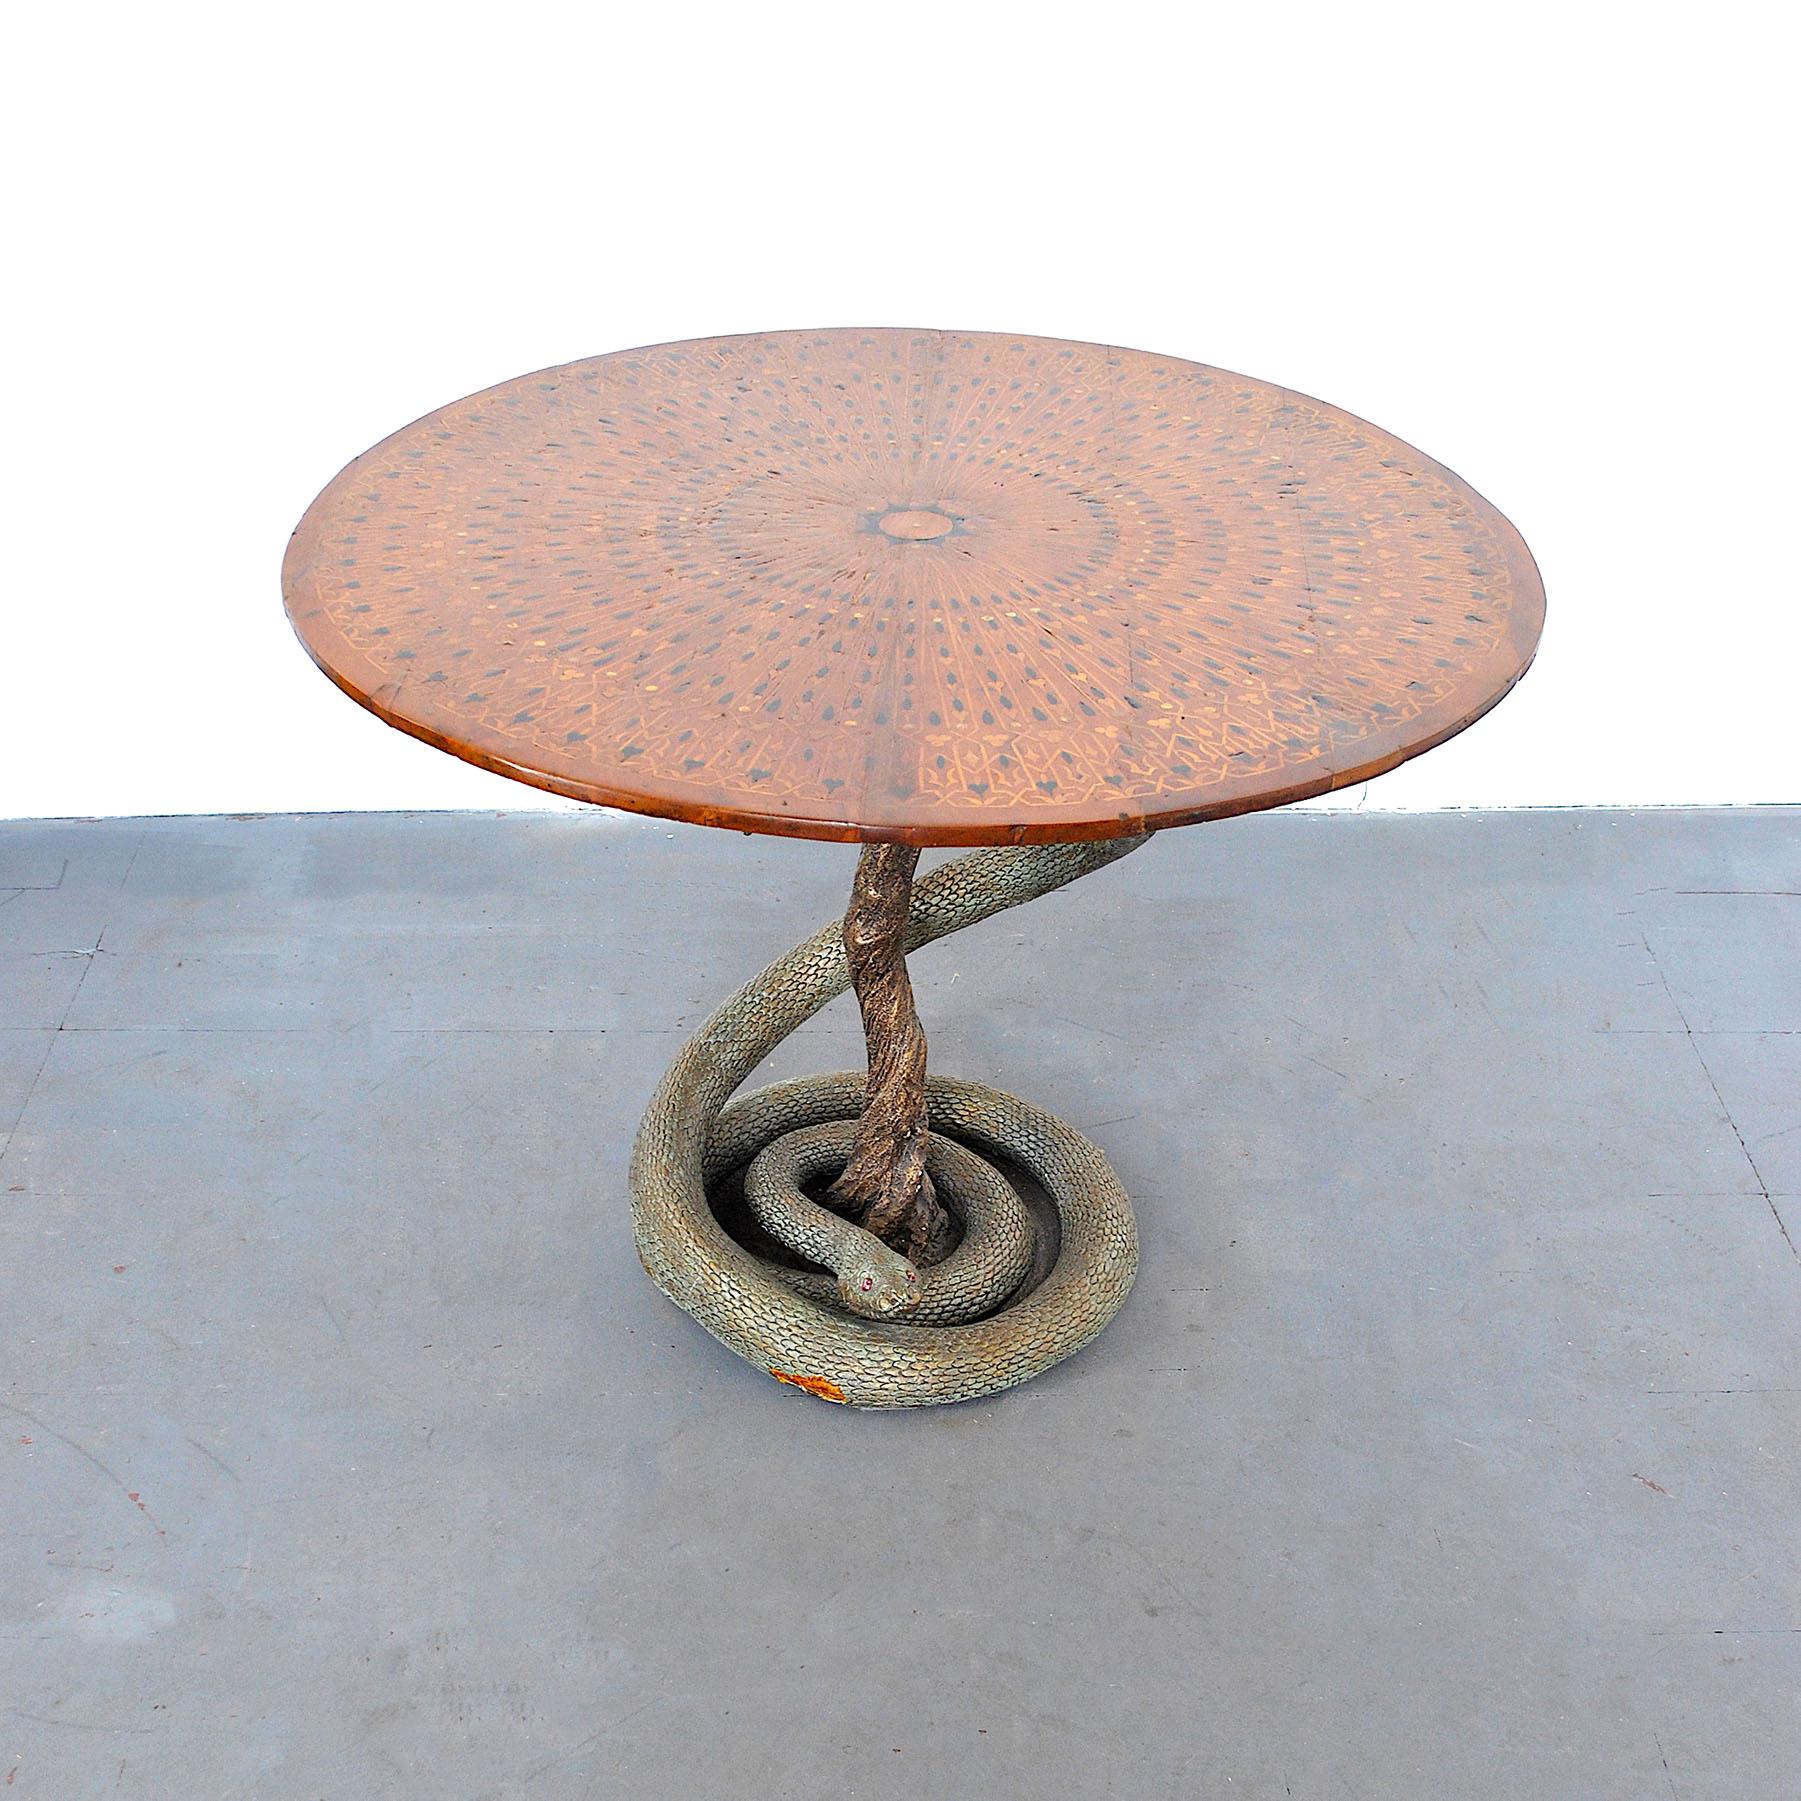 European Eclectic Game Table with Python Sculpture from the Fifties For Sale